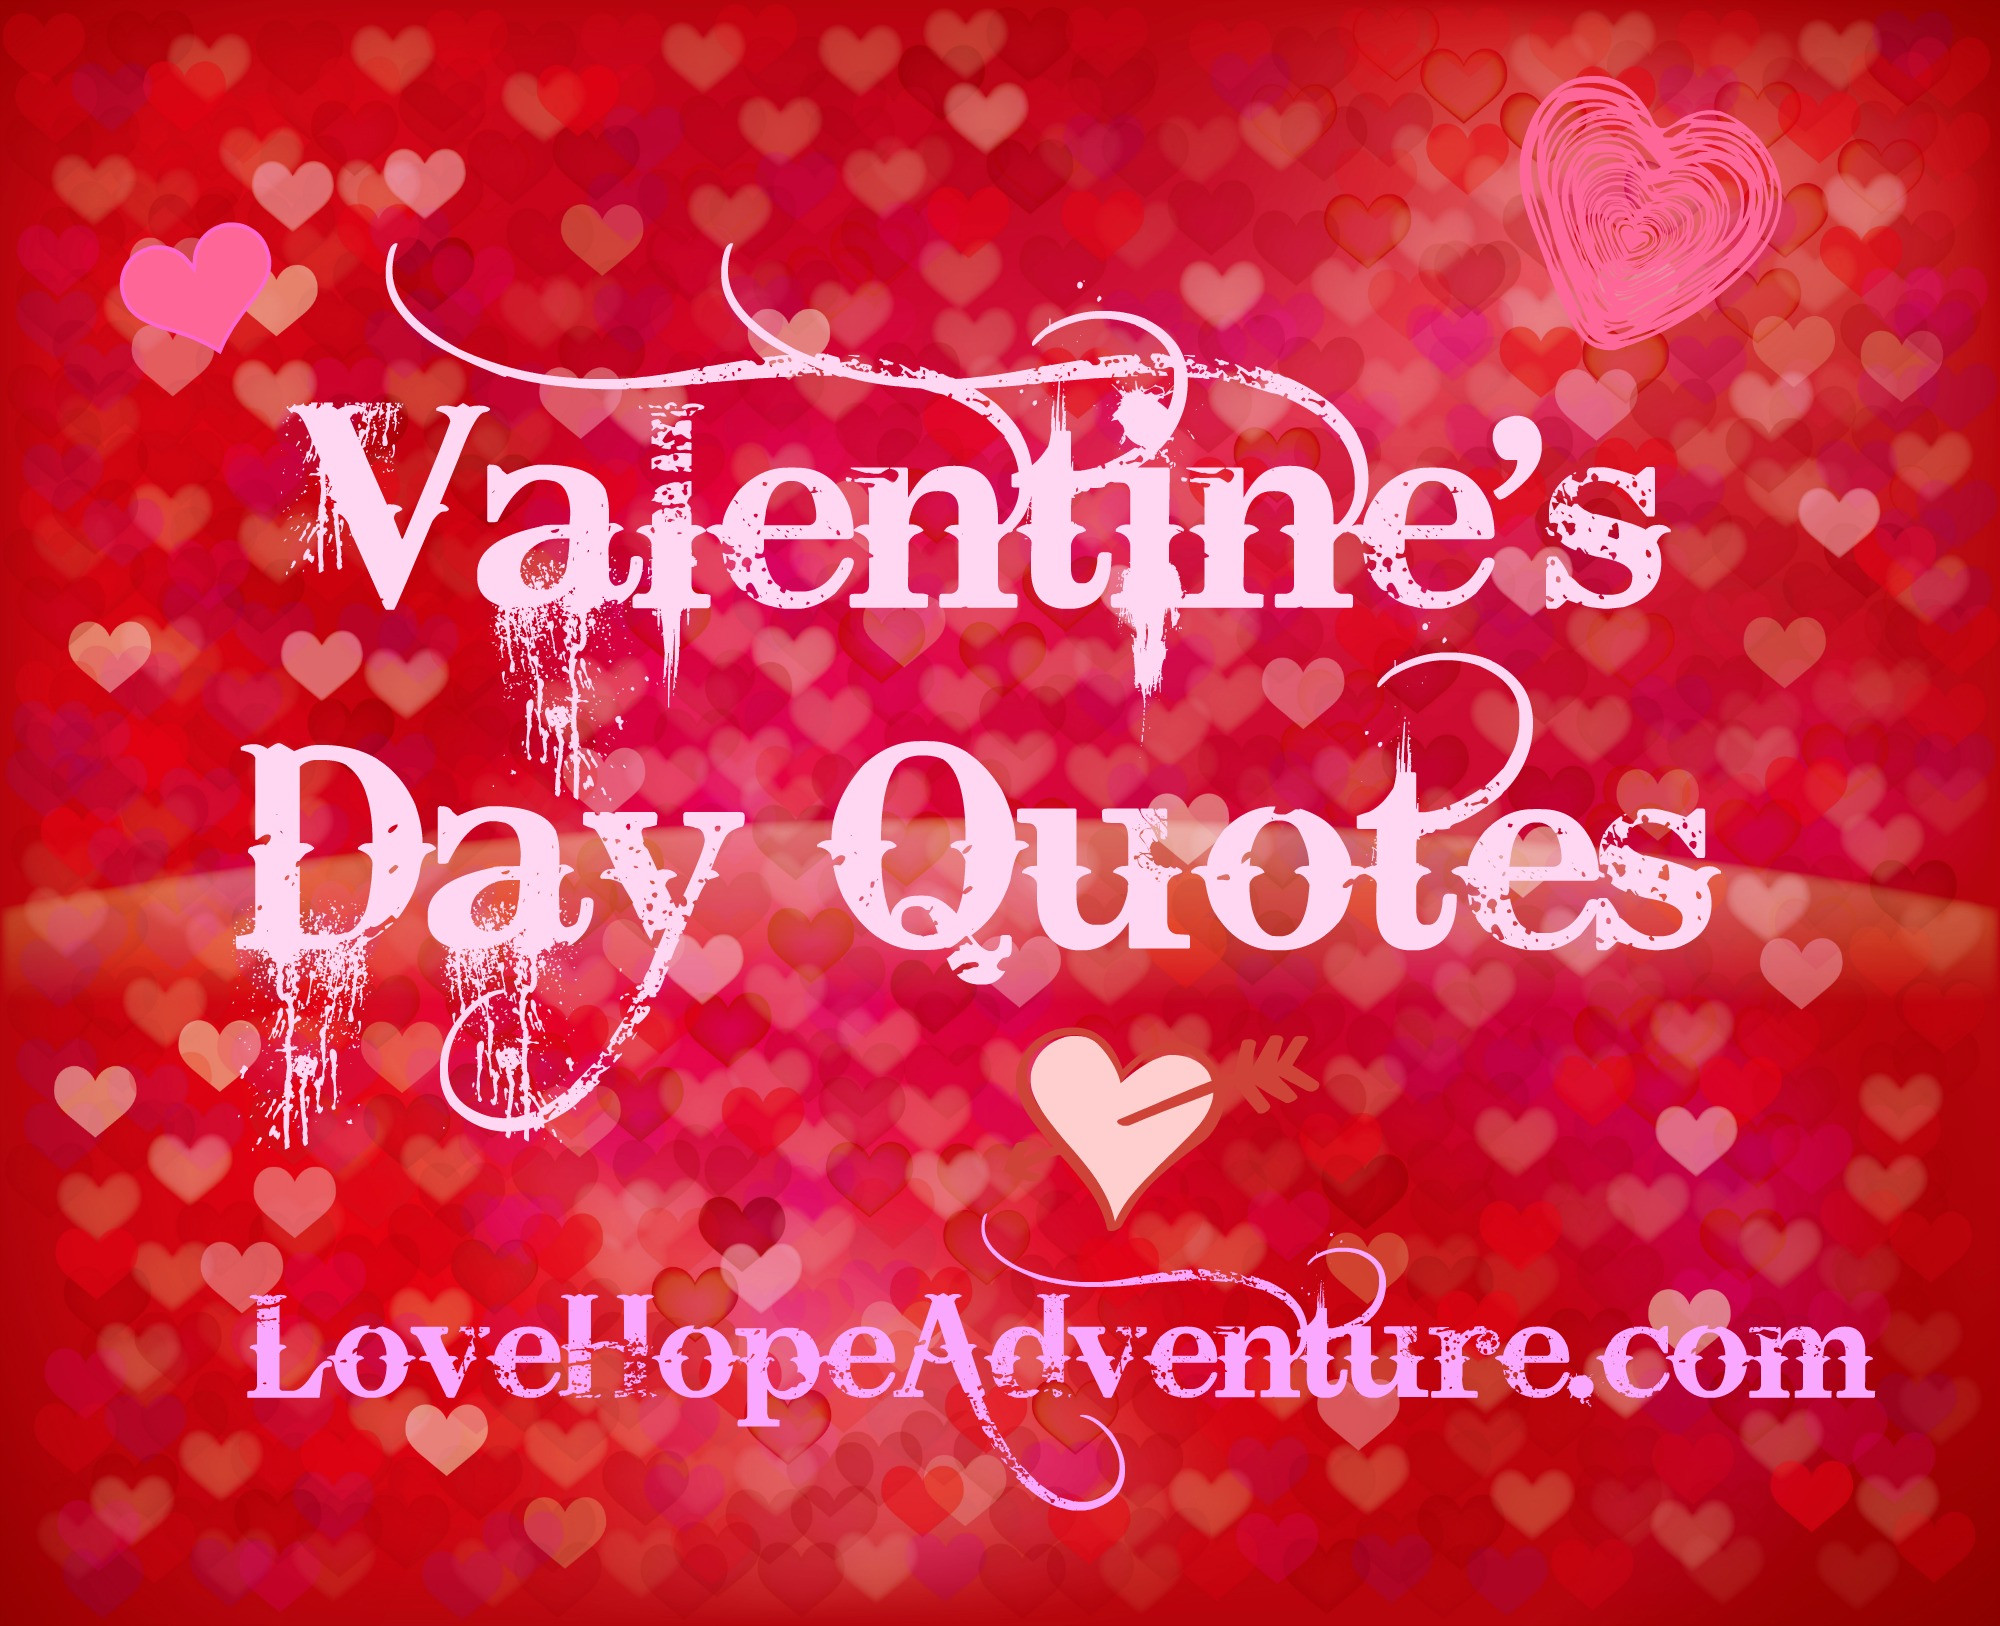 Valentines Day Love Quotes
 Valentine s Day Quotes Love Hope Adventure